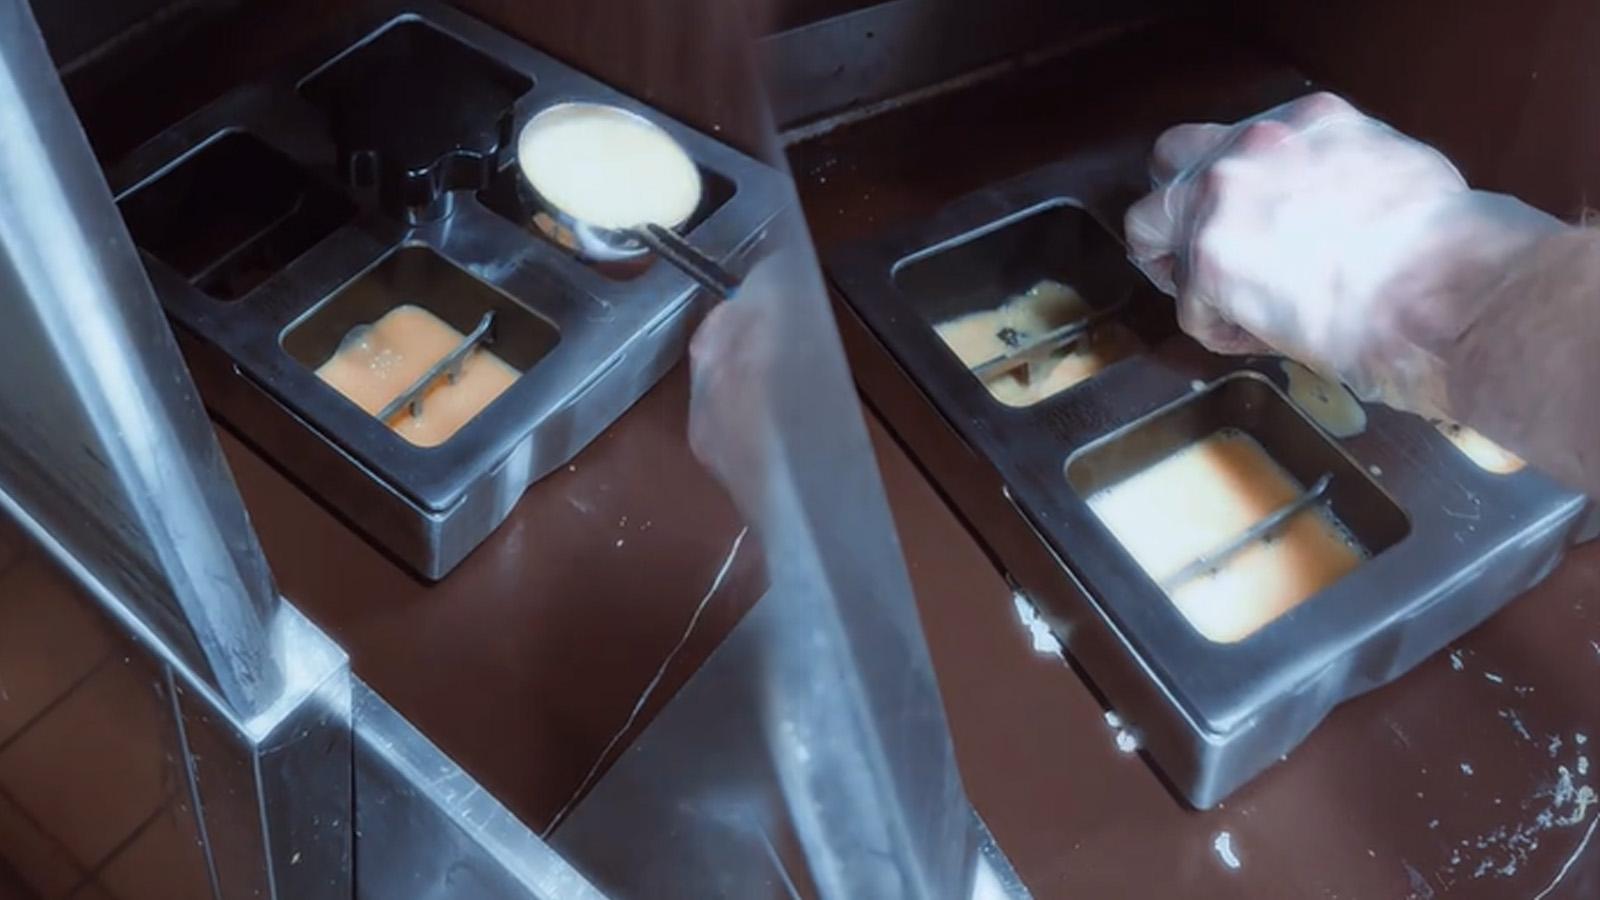 McDonald's worker baffles viewers with bizarre device to scramble eggs